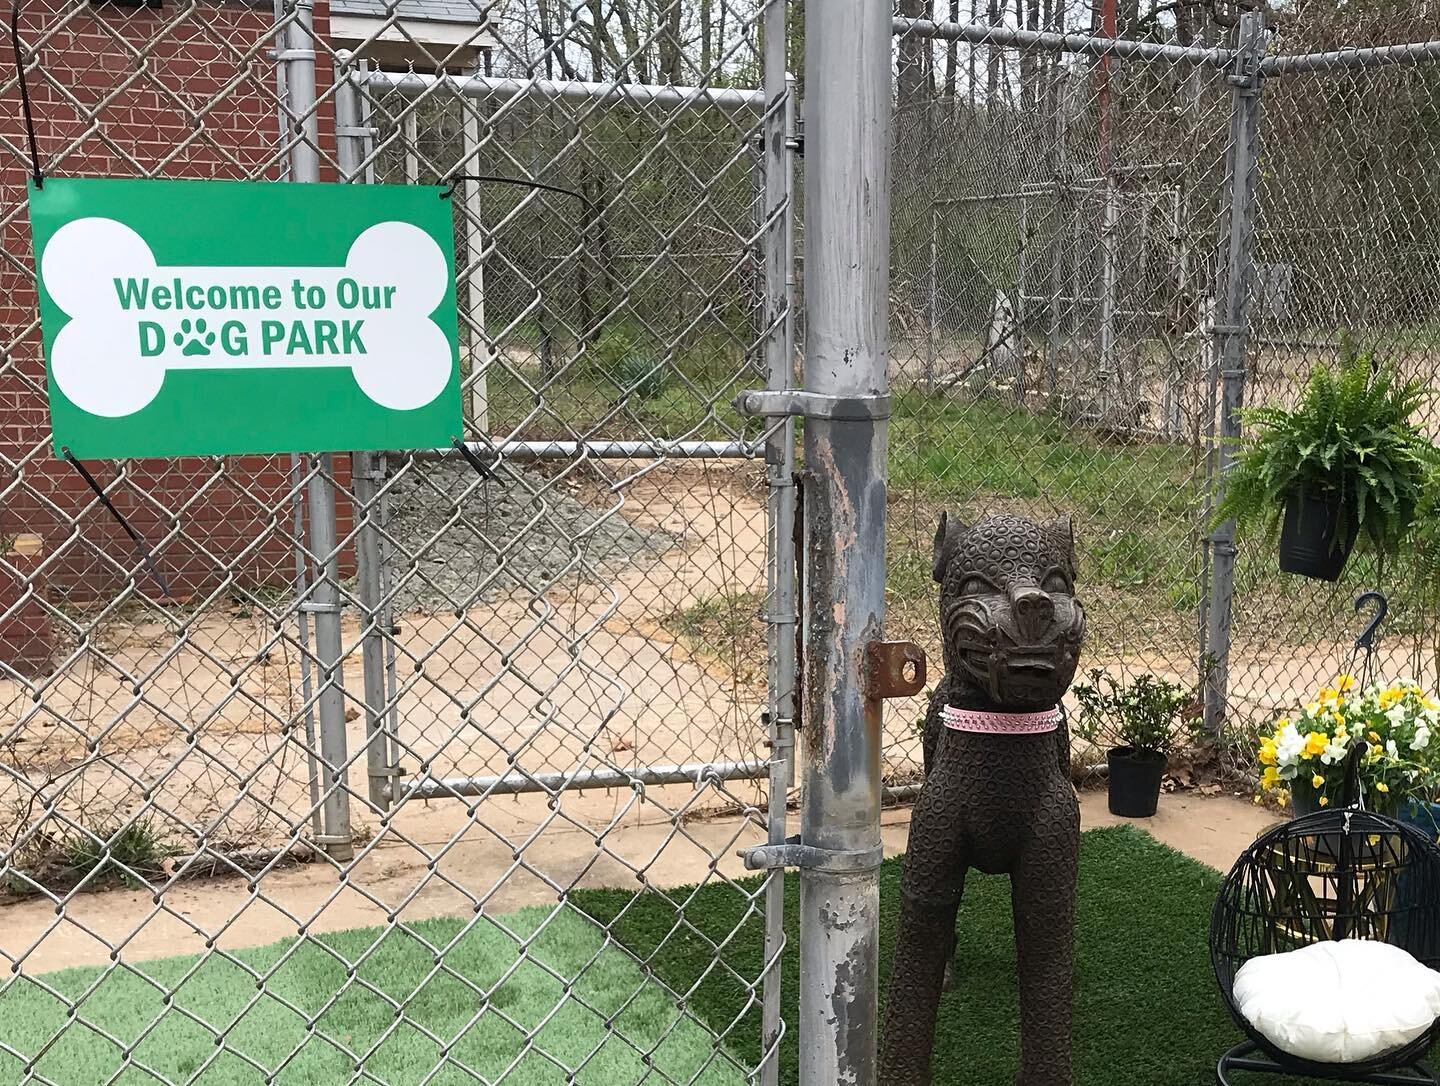 Welcome to our new Dog Park at Freedom Hill Resort (Tiny Homes/Campsites/RV). #campsite #dogparks #dogpark #dogparkdays #dogfriendly #doglover #dog #airbnb #rvliving #dogoftheday #dogfeature #doghouses #unique #dogstatue #dogart